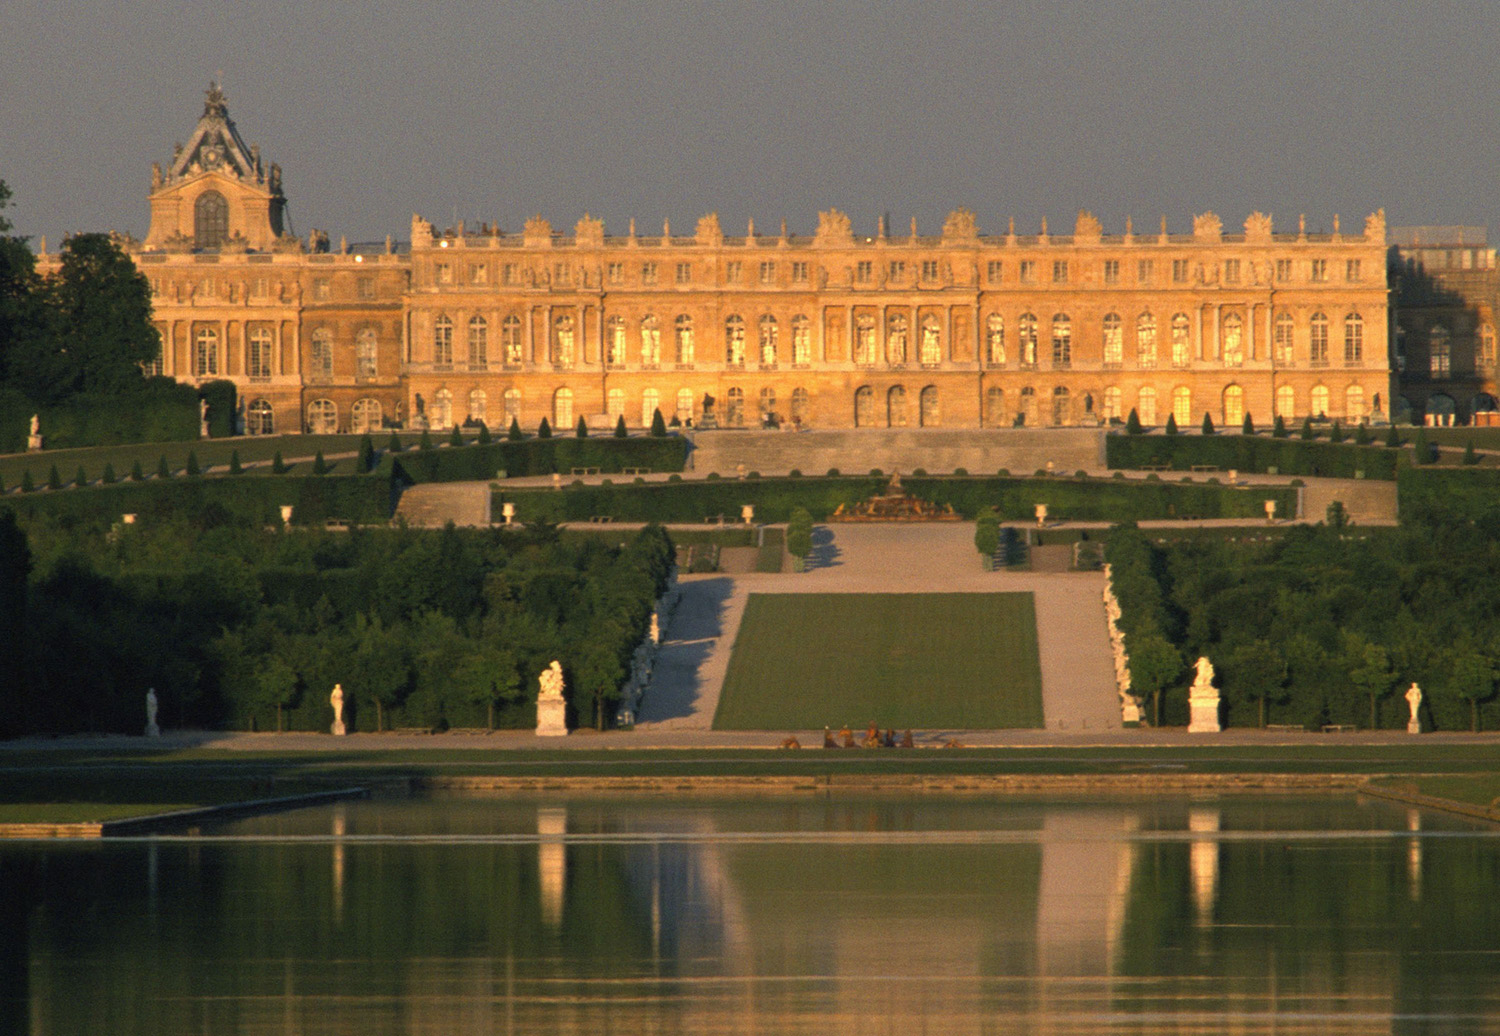 Palace of Versailles: Court Pomp and Royal Ceremony